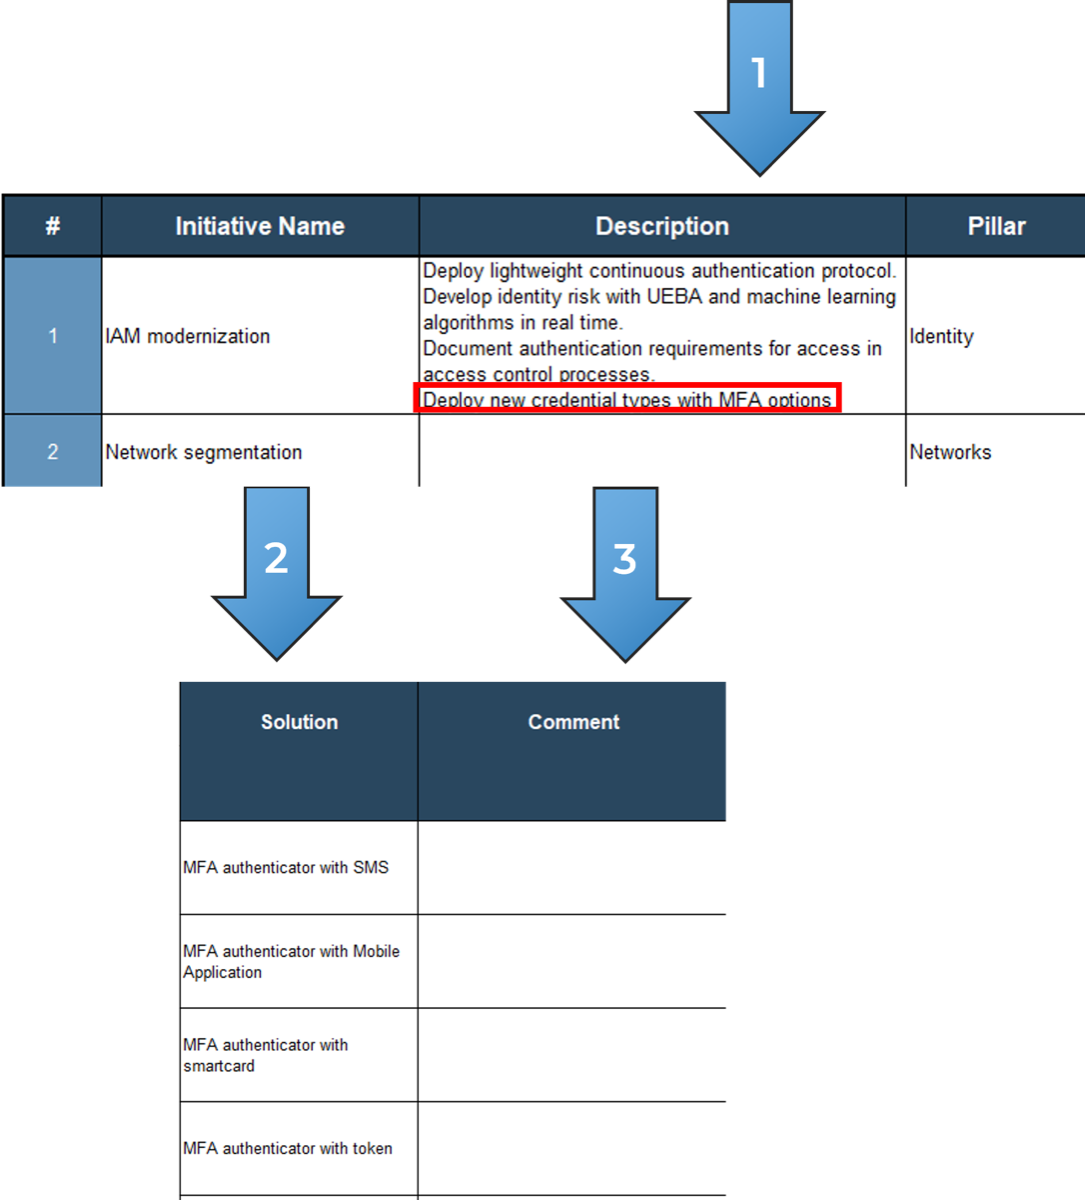 this image contains a screenshot of a sample candidate solution, which can be done using Info-Tech's Zero Trust Program Gap Analysis Tool